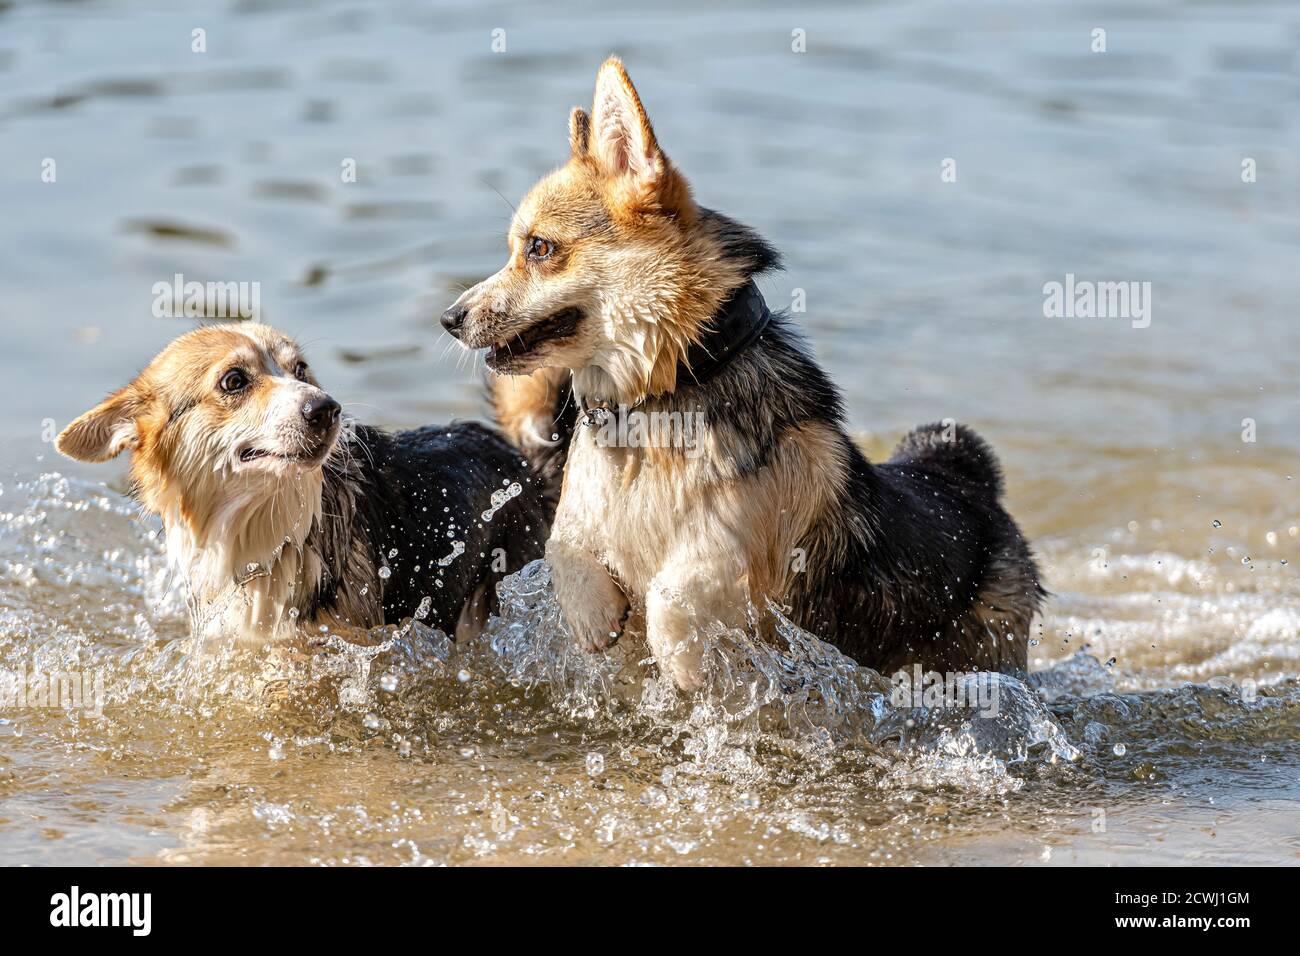 Welsh Corgi Pembroke dog swims in the lake and enjoys a sunny day Stock Photo